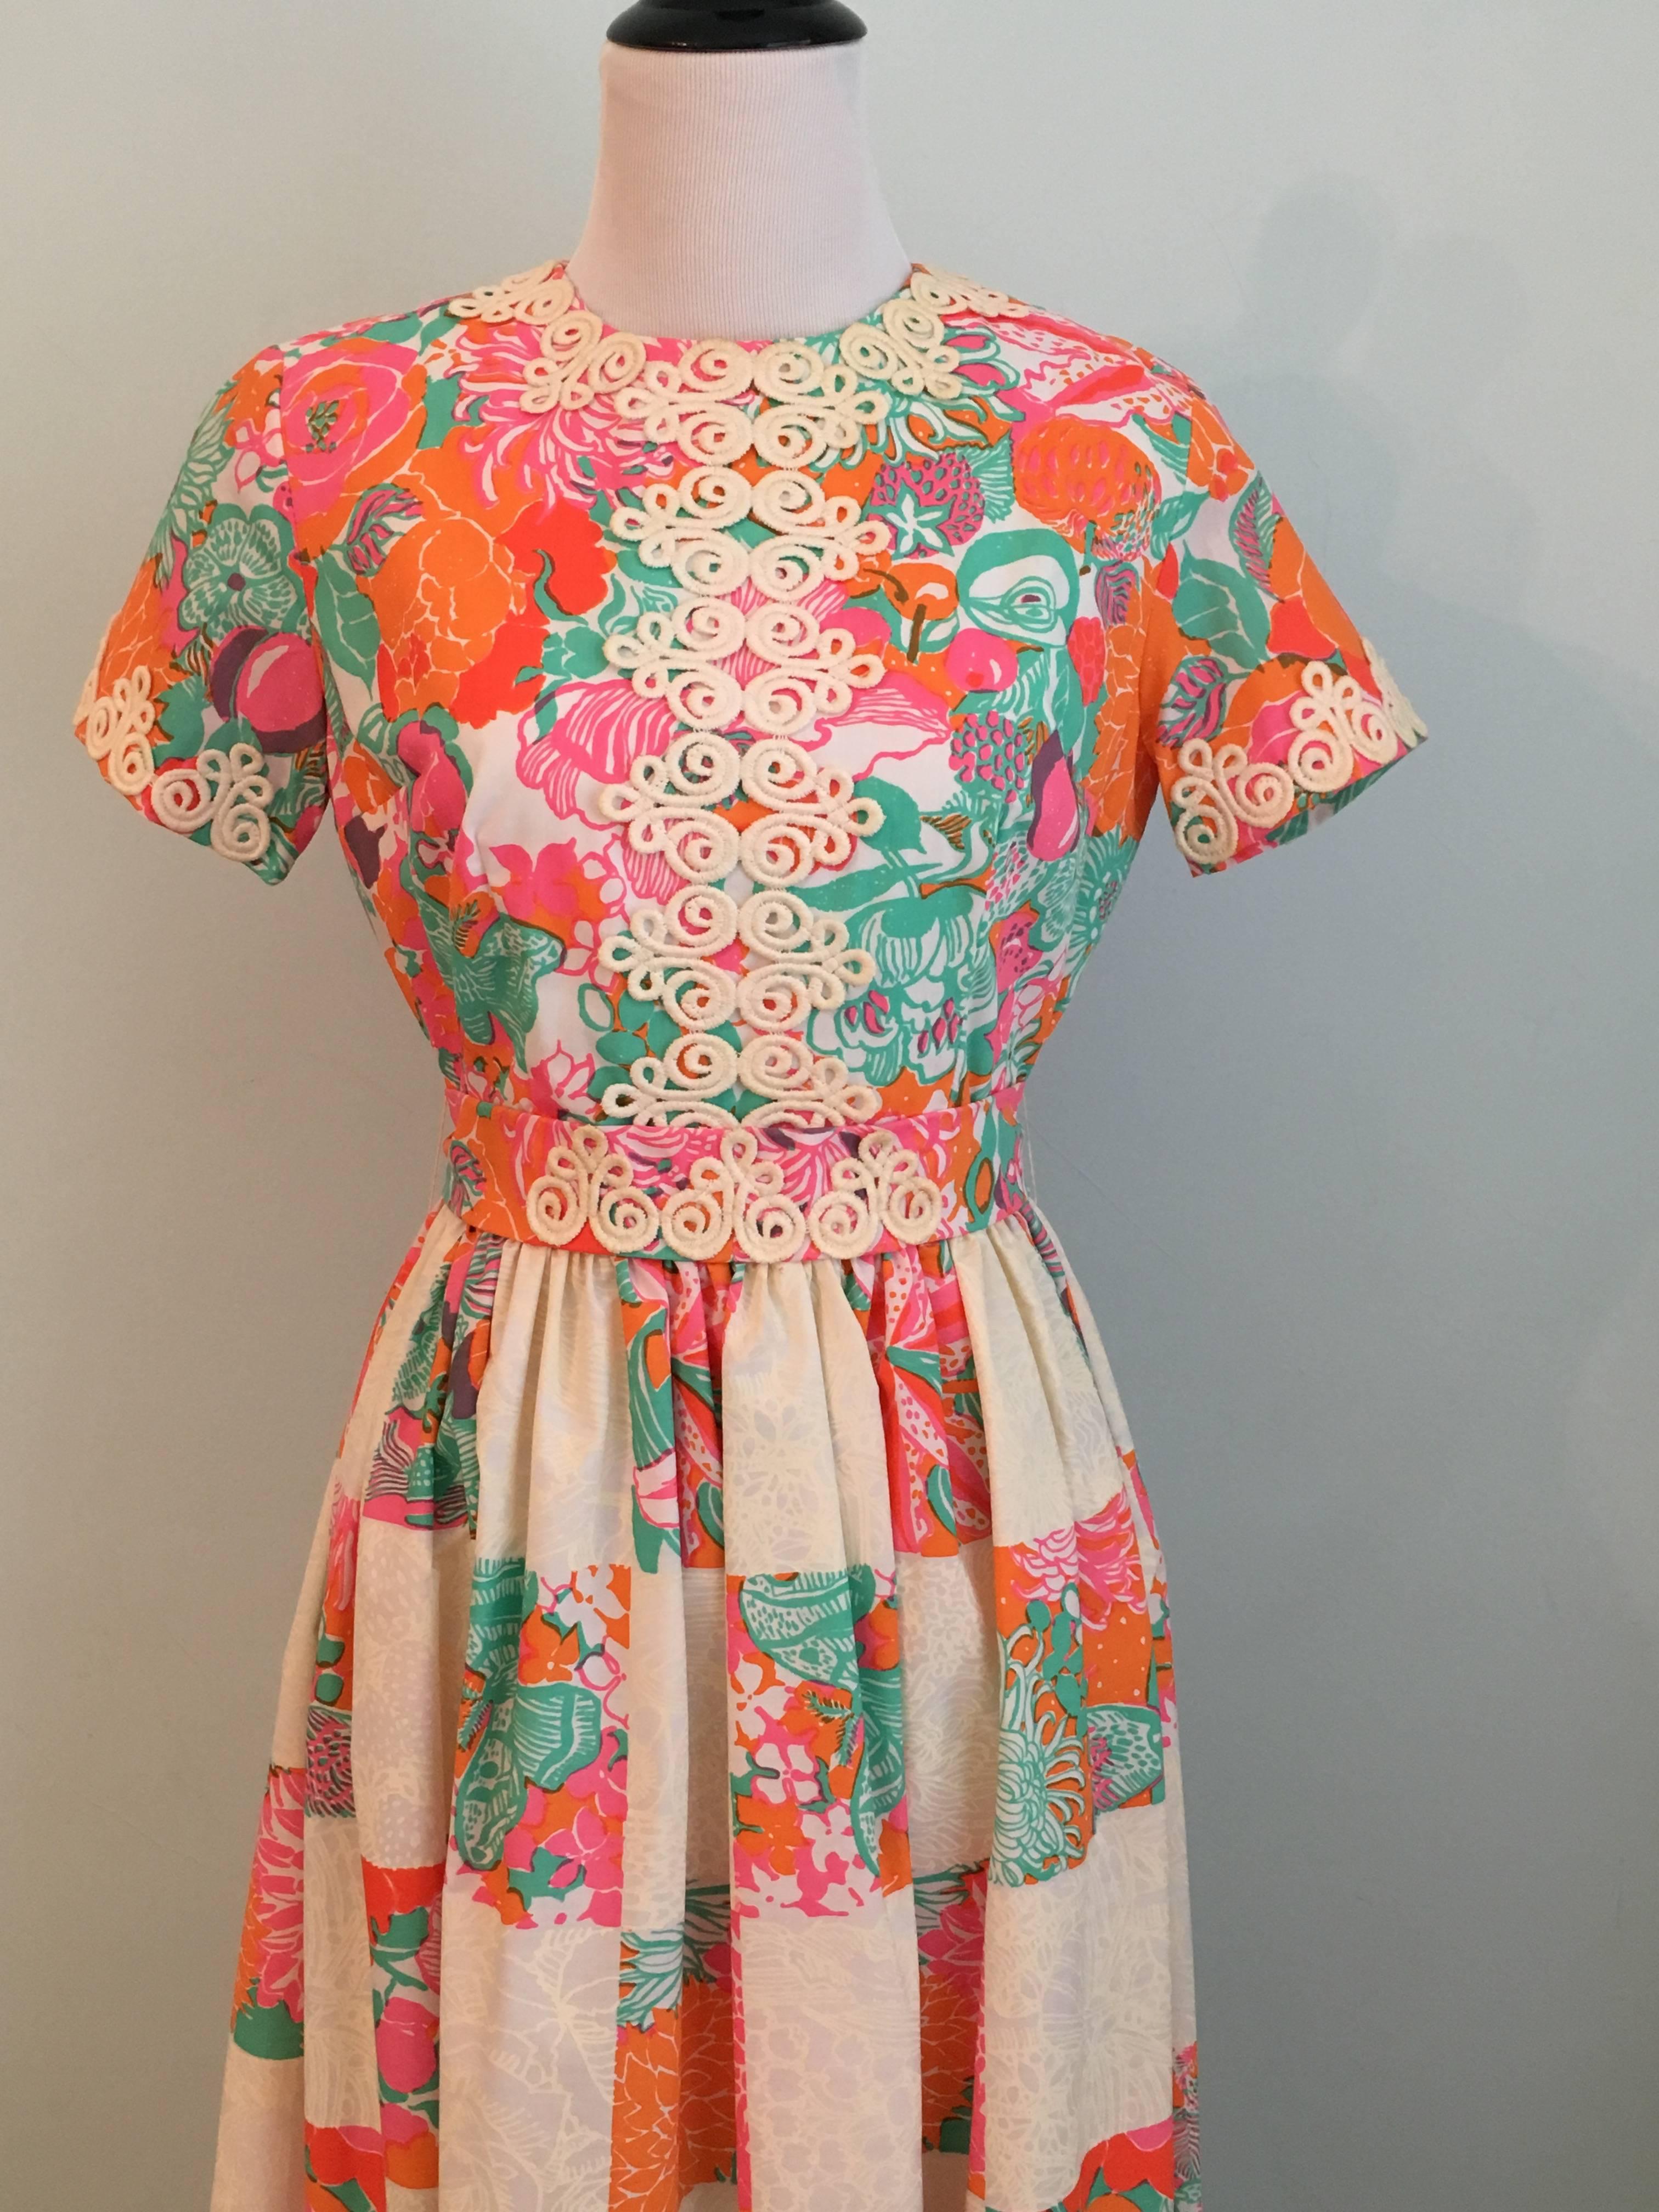 1960s Lilly Pulitzer Maxi Dress with Patchwork Print Skirt In Excellent Condition For Sale In Chicago, IL